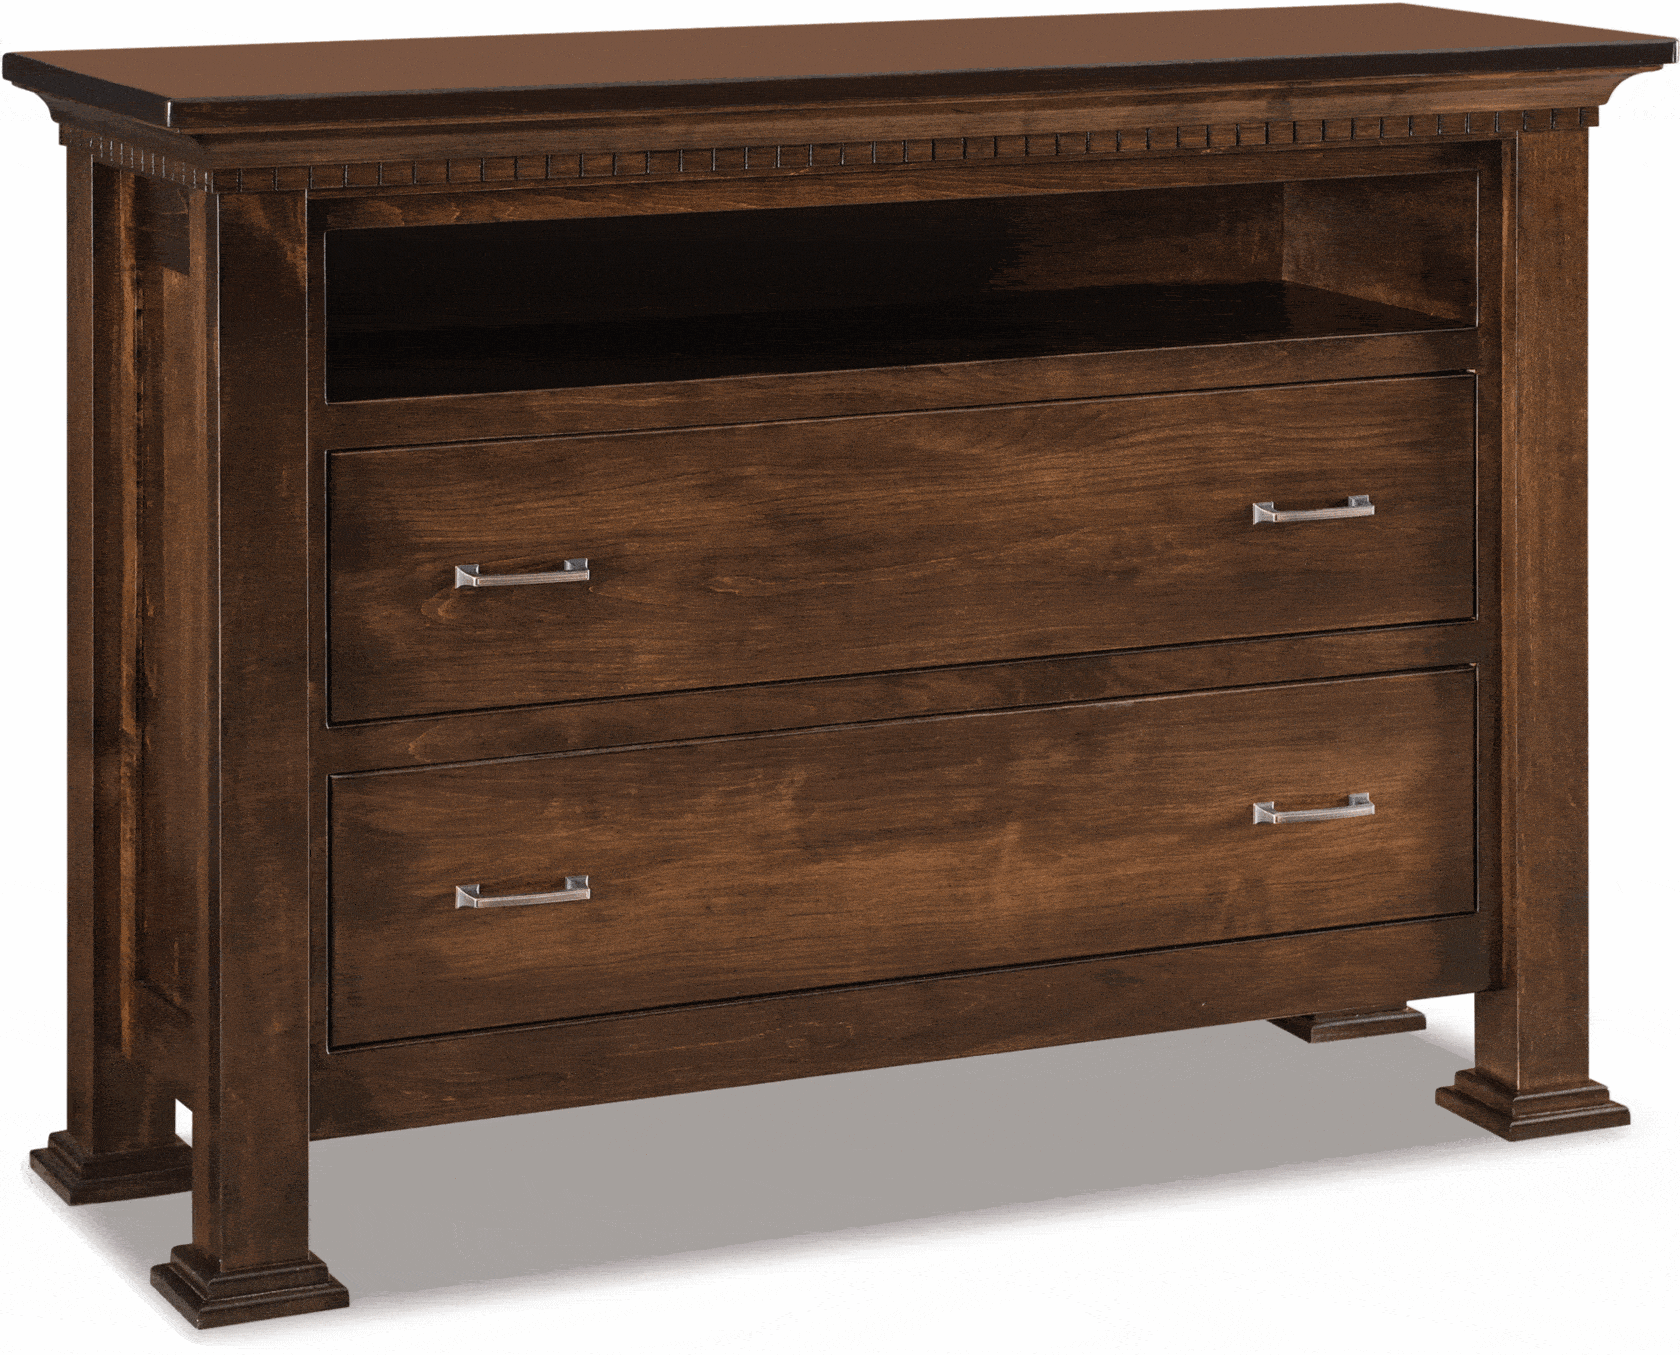 Additional Bedroom Chests